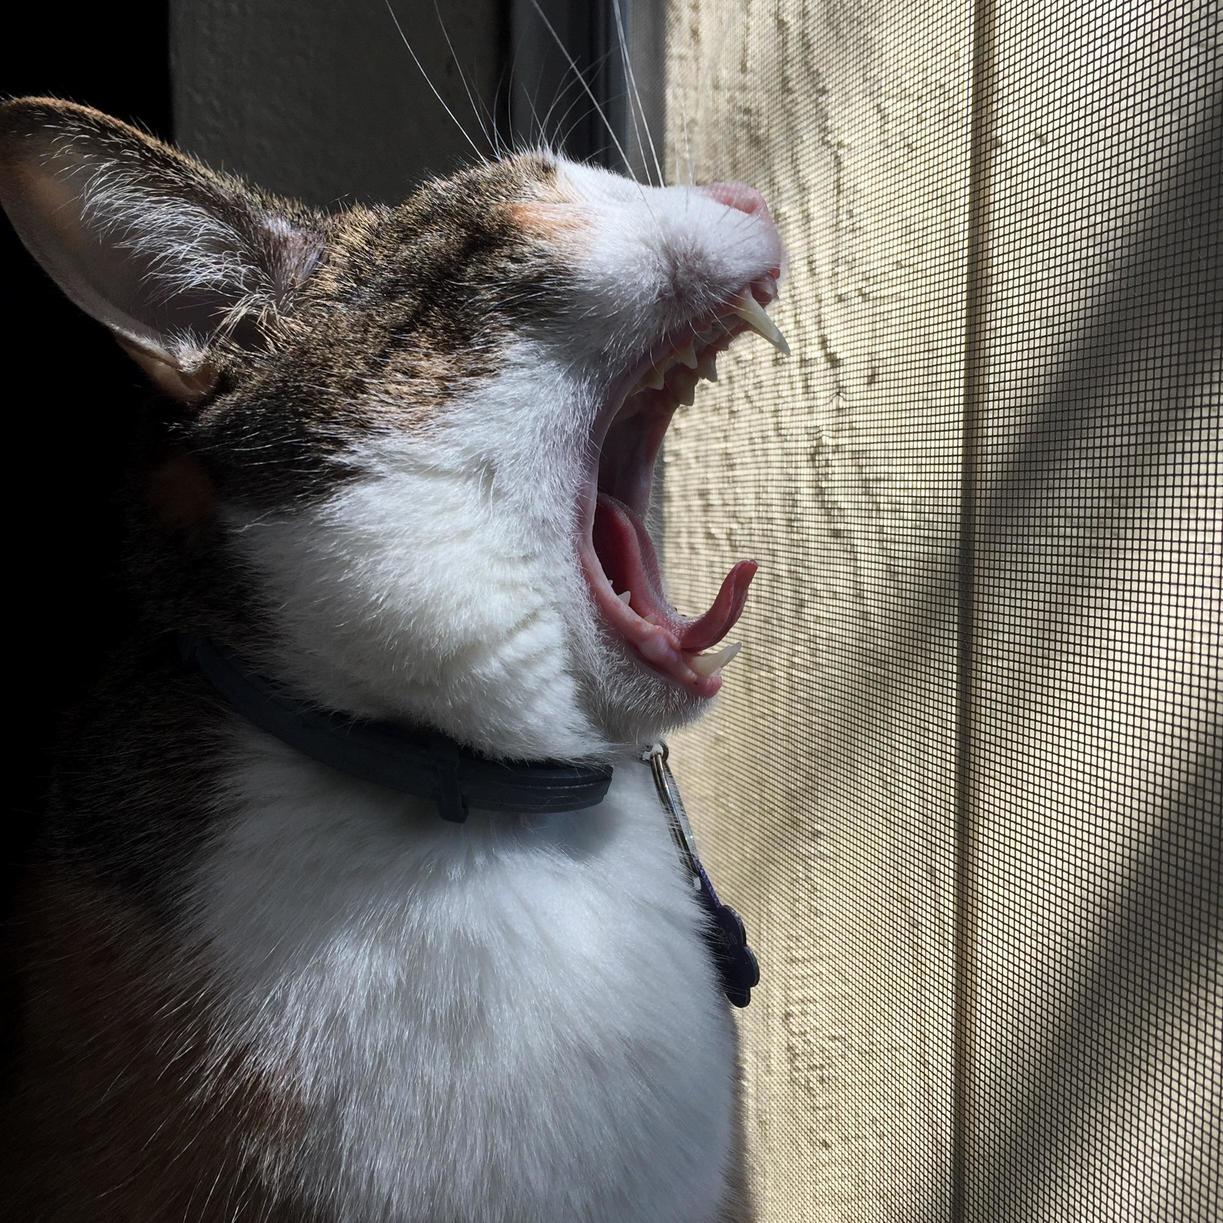 Mid yawn my cat resembles a possessed easter bunny.